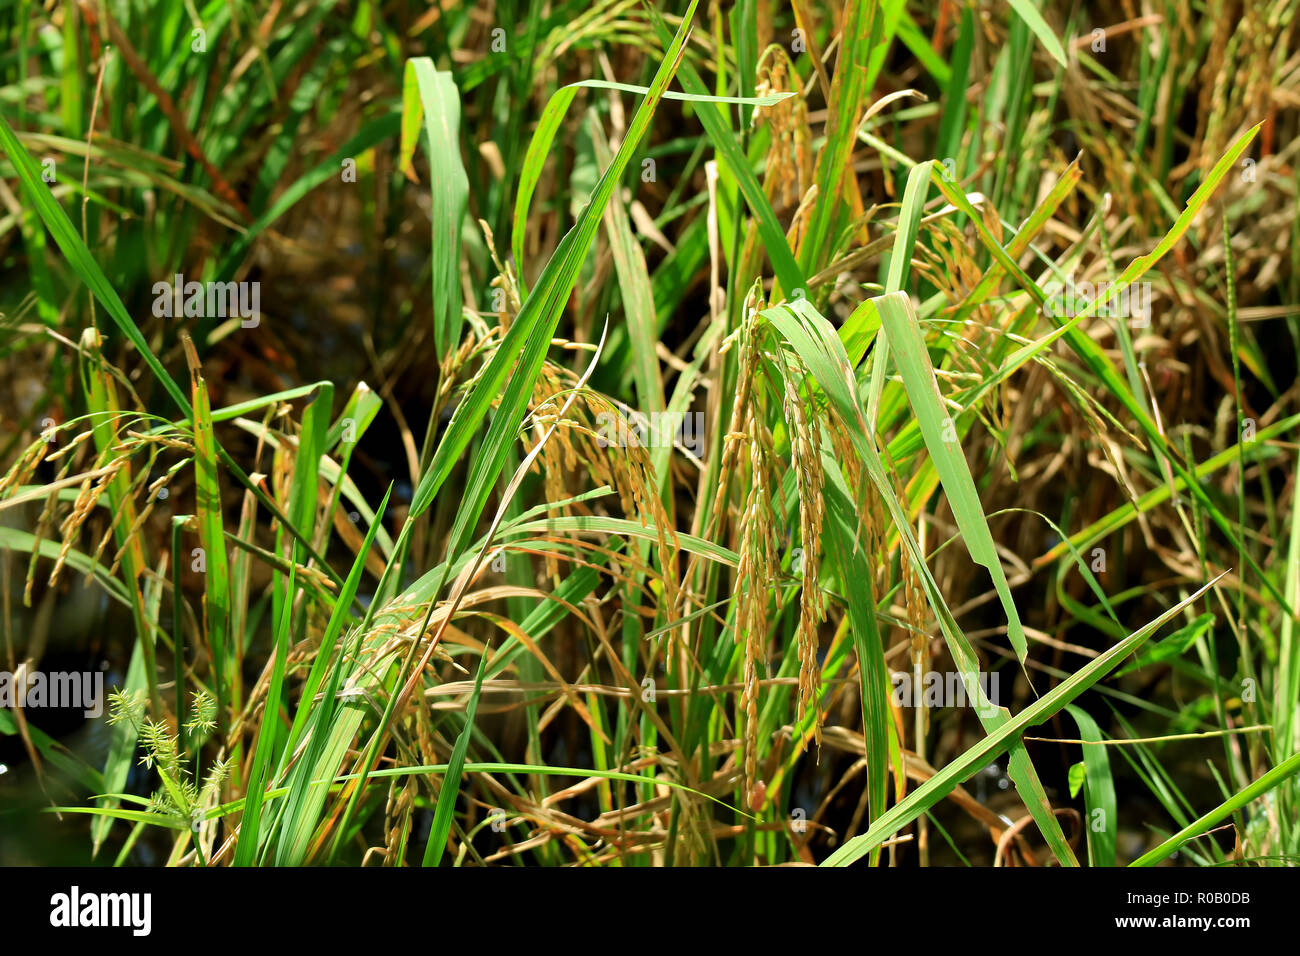 Closed up Golden Ripe Rice Grains in the Sunshine, the Paddy Field of Thailand Stock Photo